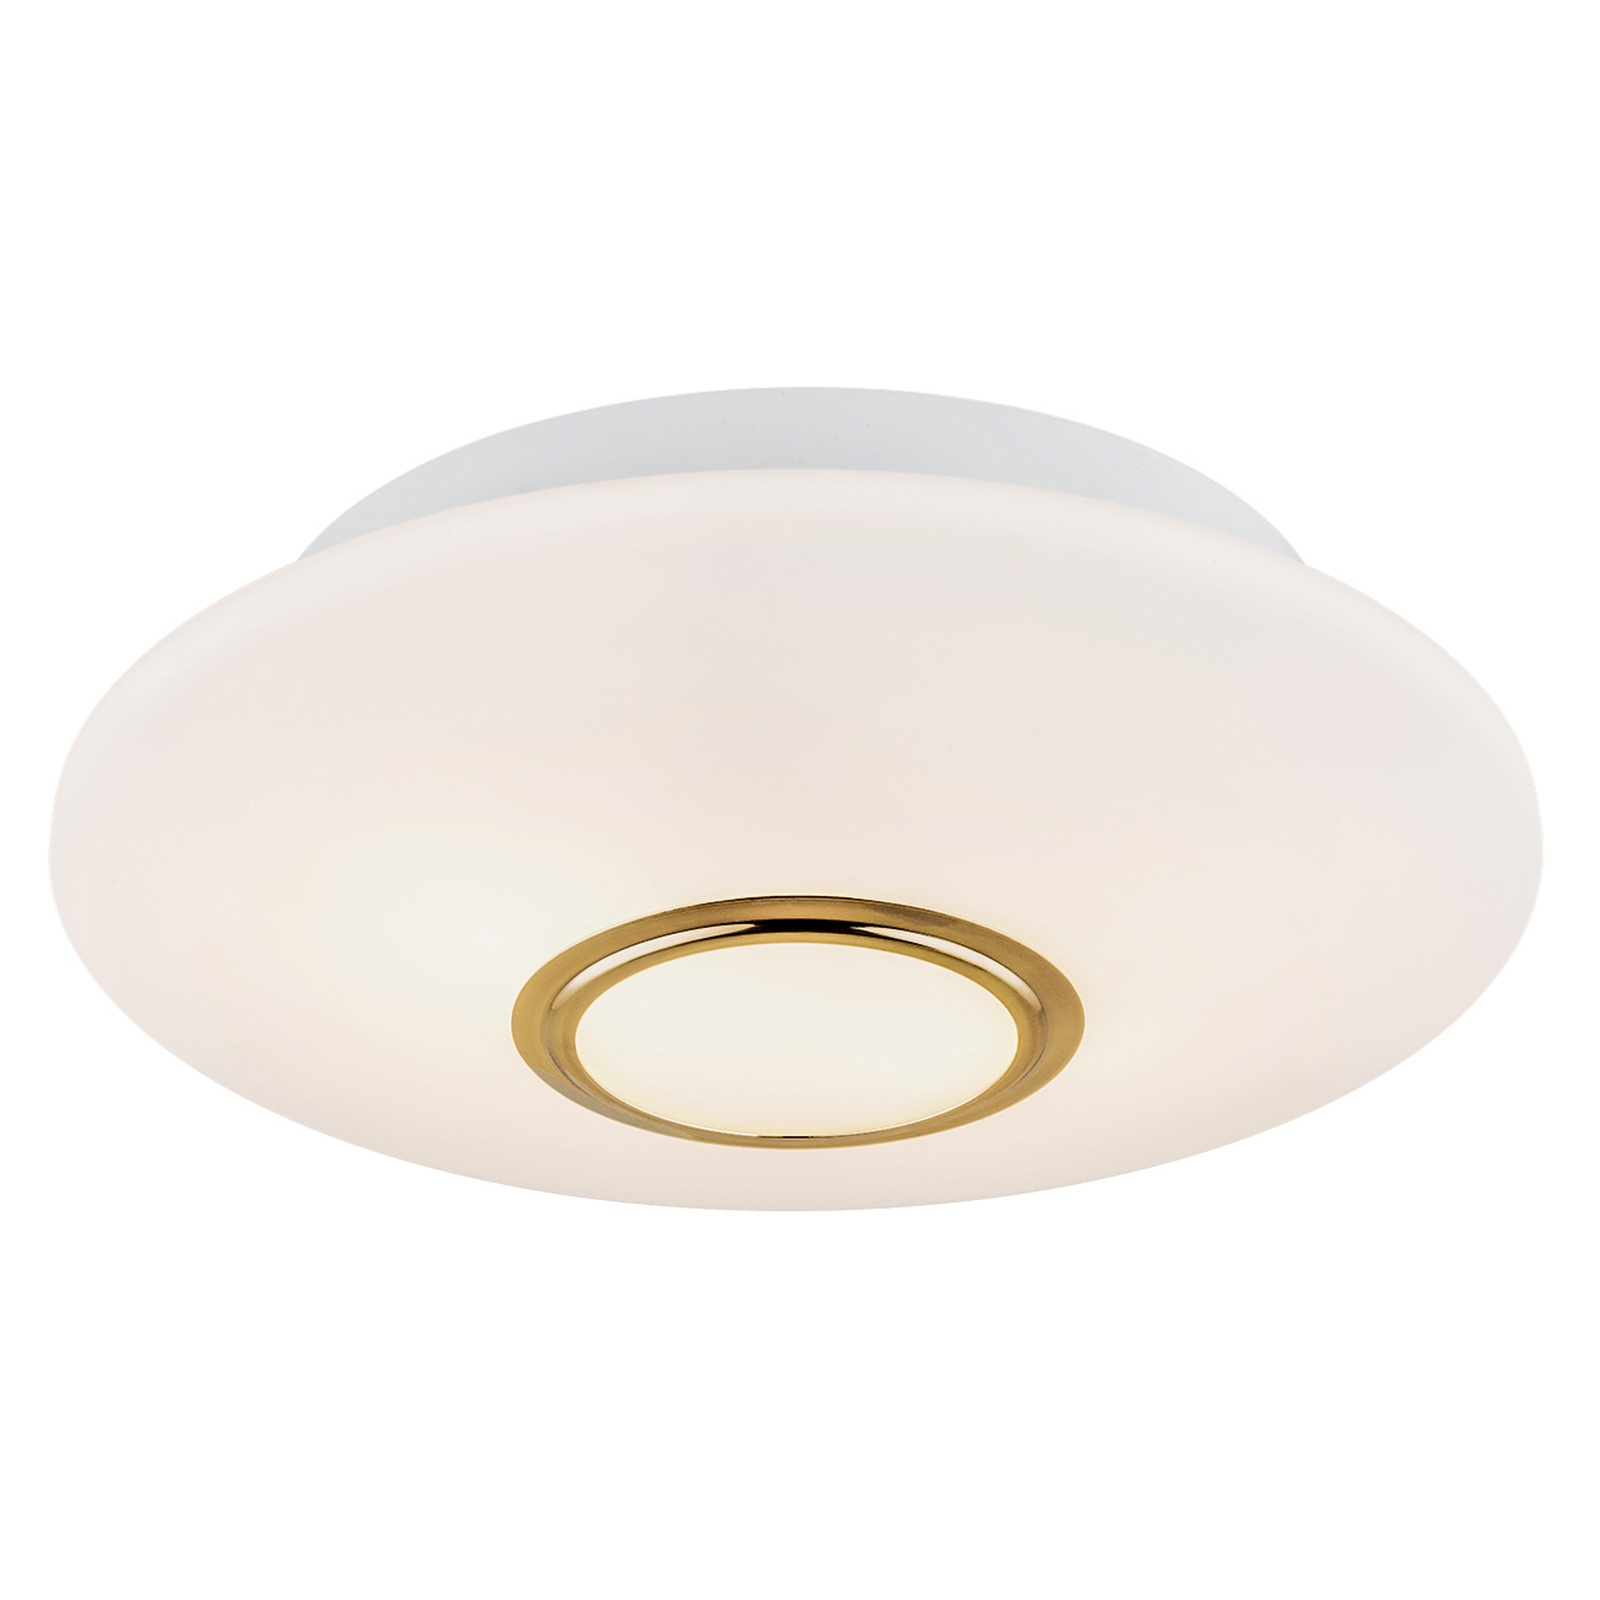 Cyril ceiling light made of glass, white and brass